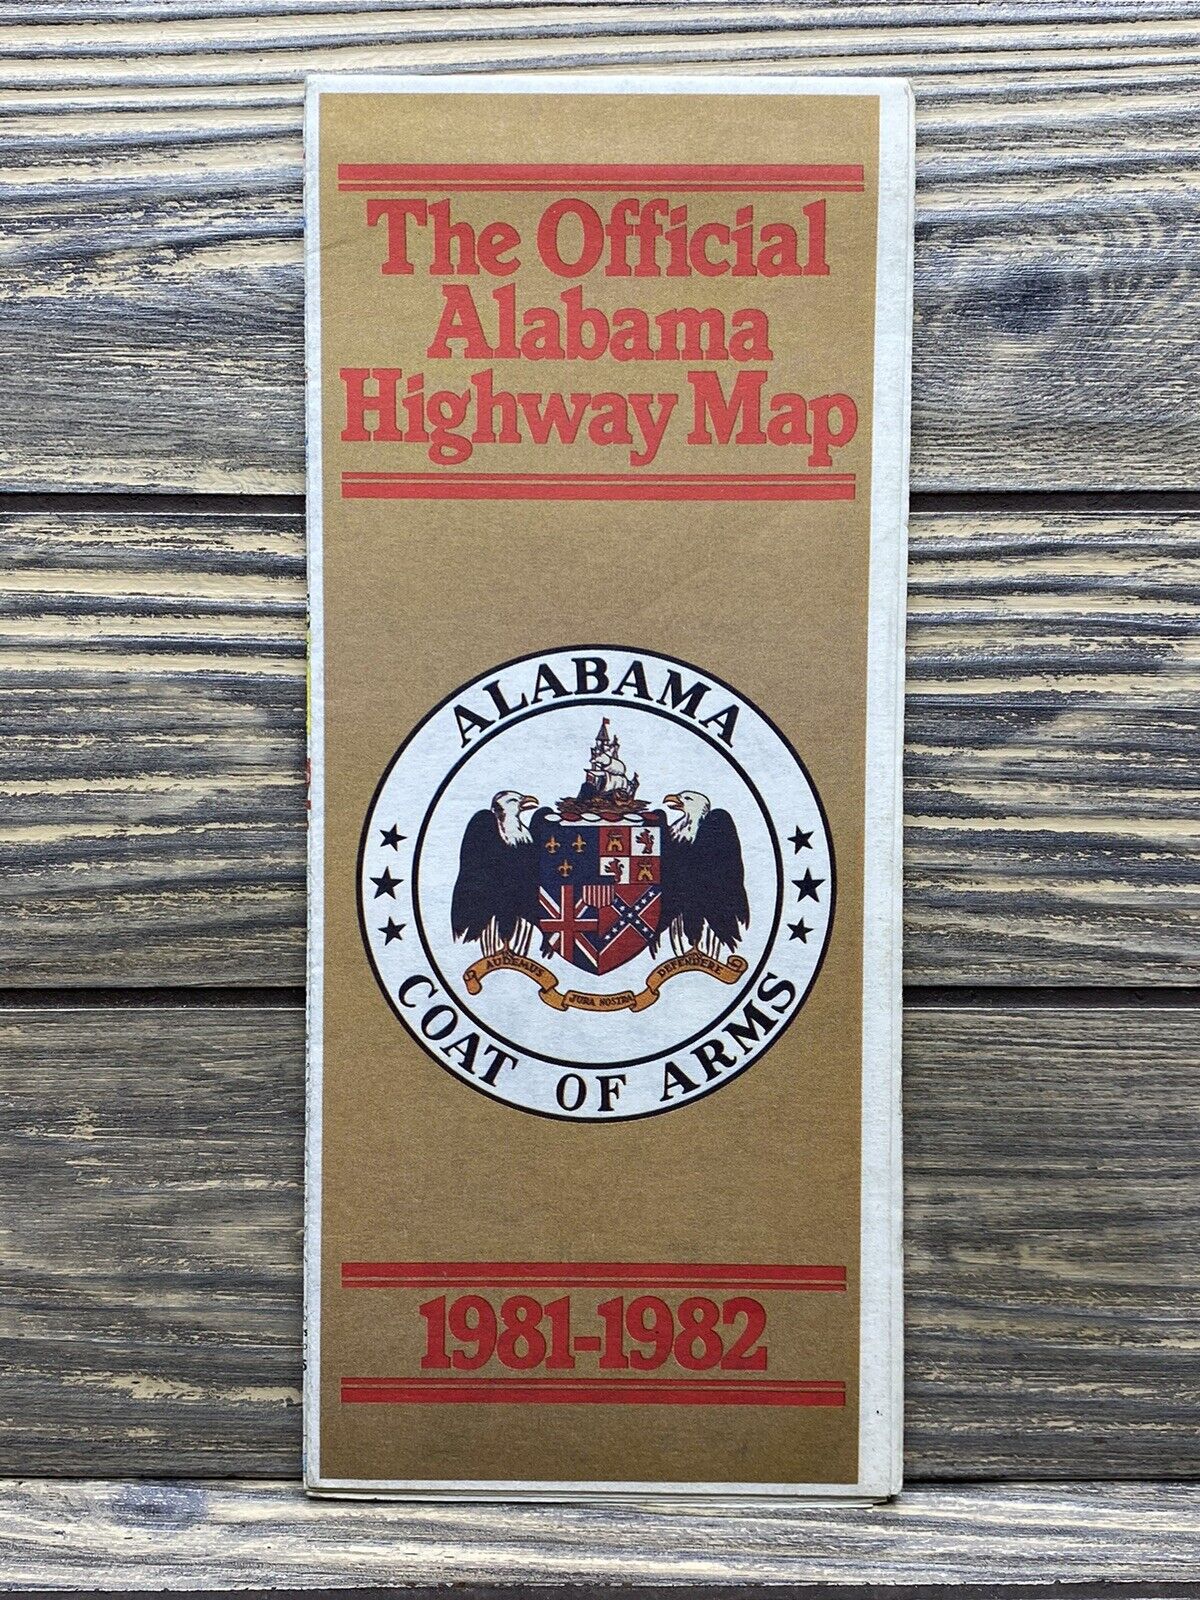 Vintage 1981-1982 The Official Alabama Highway ￼Map